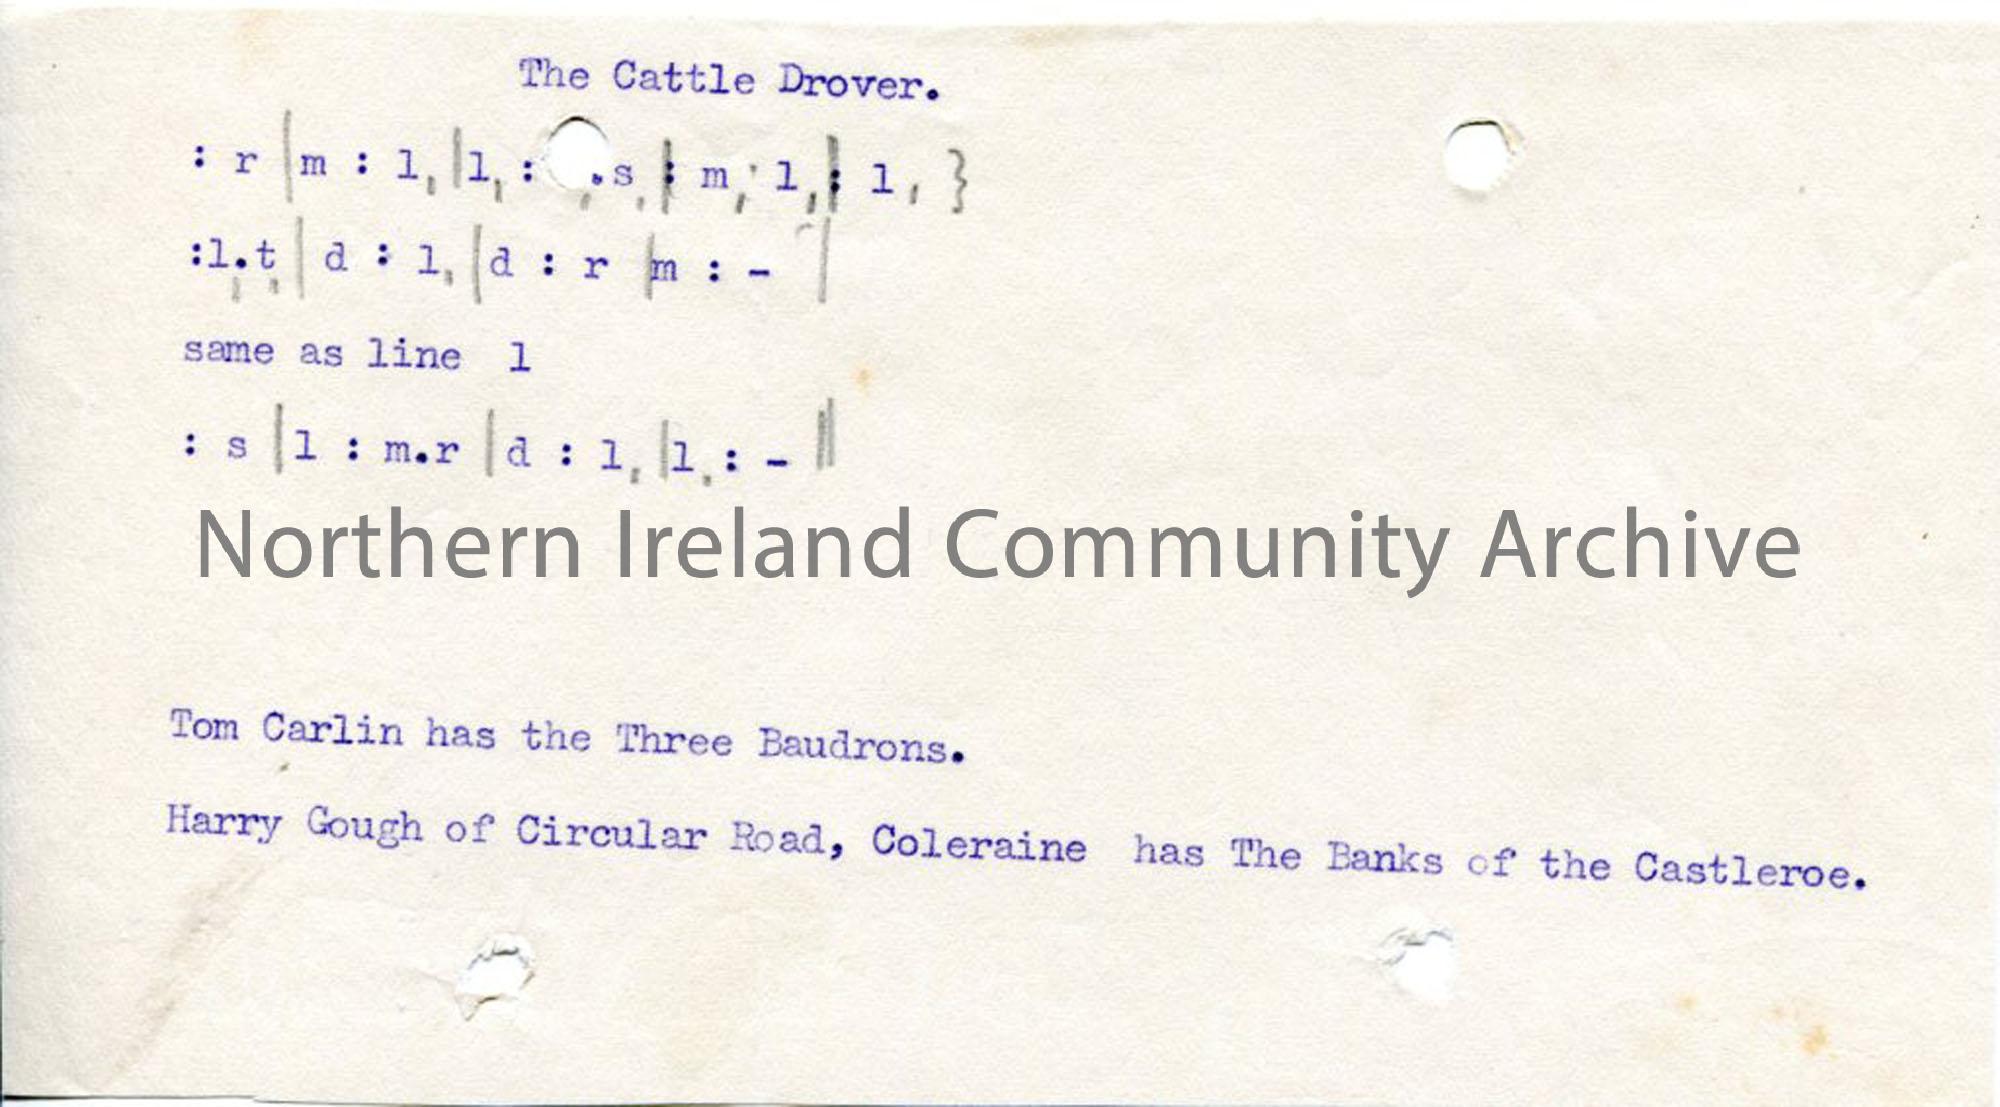 Typed tonic sol-fa notation to ‘The Cattle Drover’